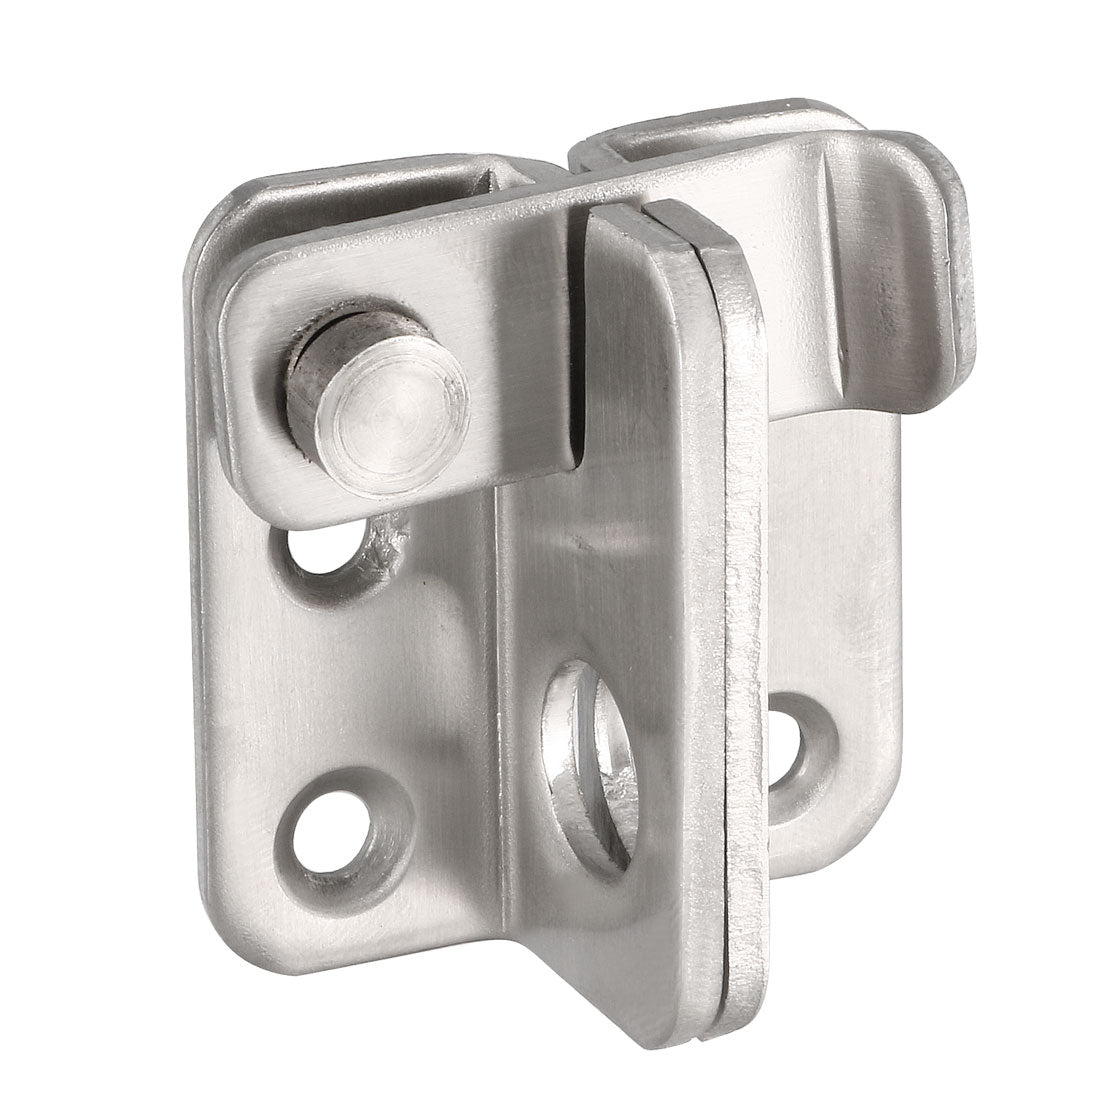 uxcell Uxcell Flip Door Latch 201 Stainless Steel 45x40mm Gate Latch Left Open Hasp Slide Lock with Padlock Hole 2 Pcs